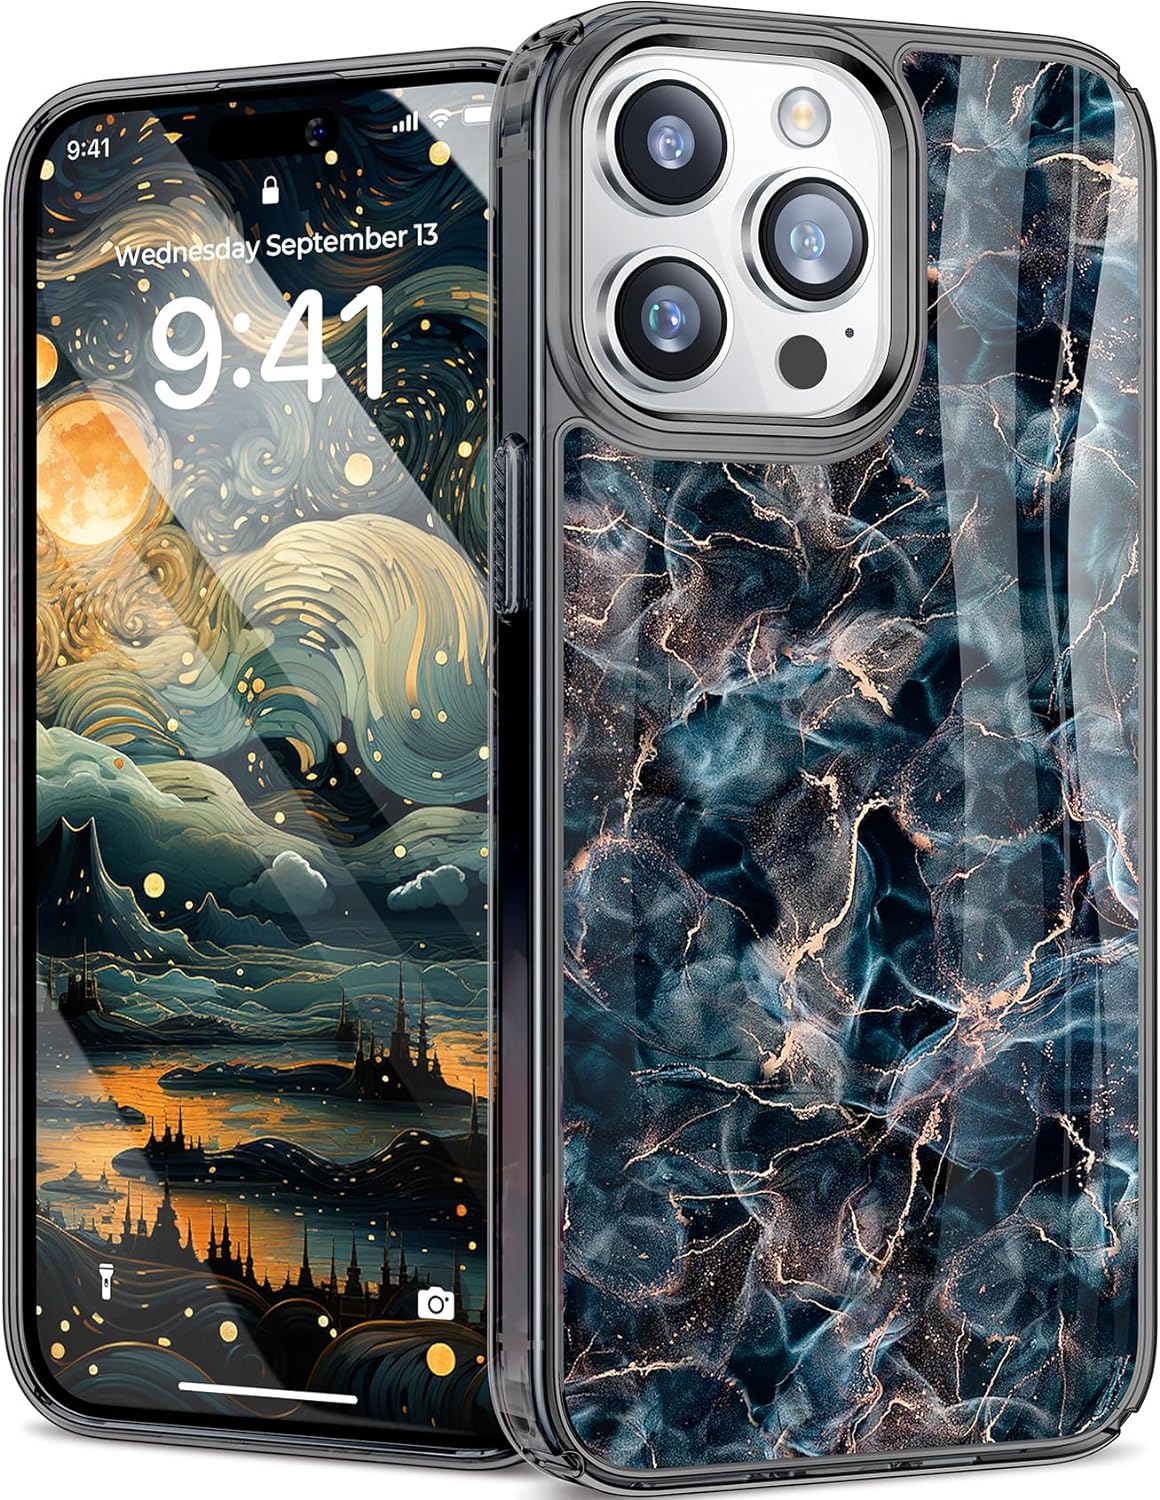 Humixx for iPhone 15 Pro Max & iPhone 15 Pro Case, [10 FT Military Drop Protection] [Non-Yellowing] Protective Cover - Blue Fog Gold Glitter Marble for iPhone 15 Pro Max Case- (Starlight Abyss/Blue)